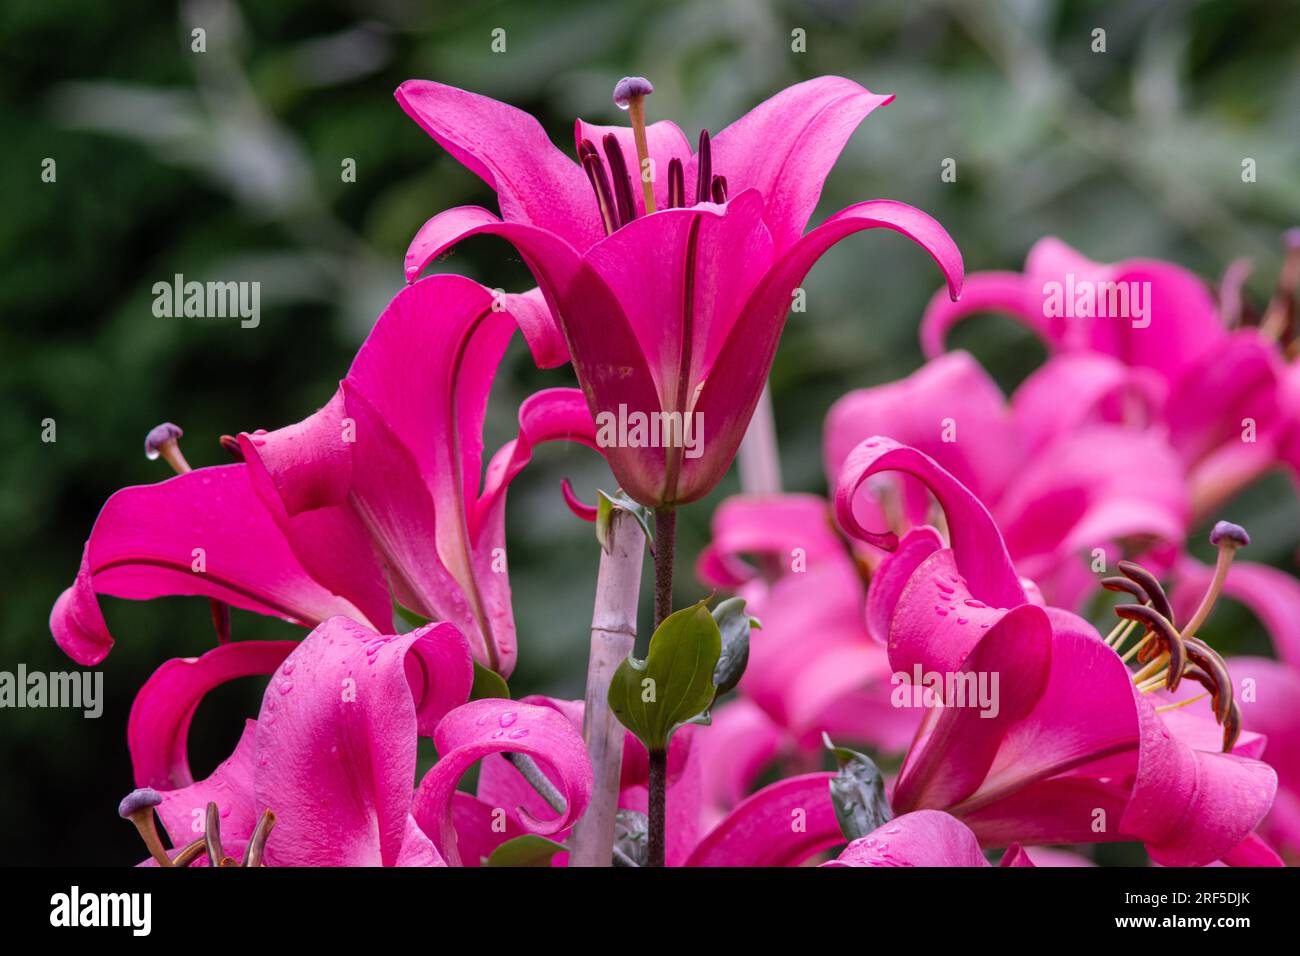 A pink explosion tree lily in bloom Stock Photo